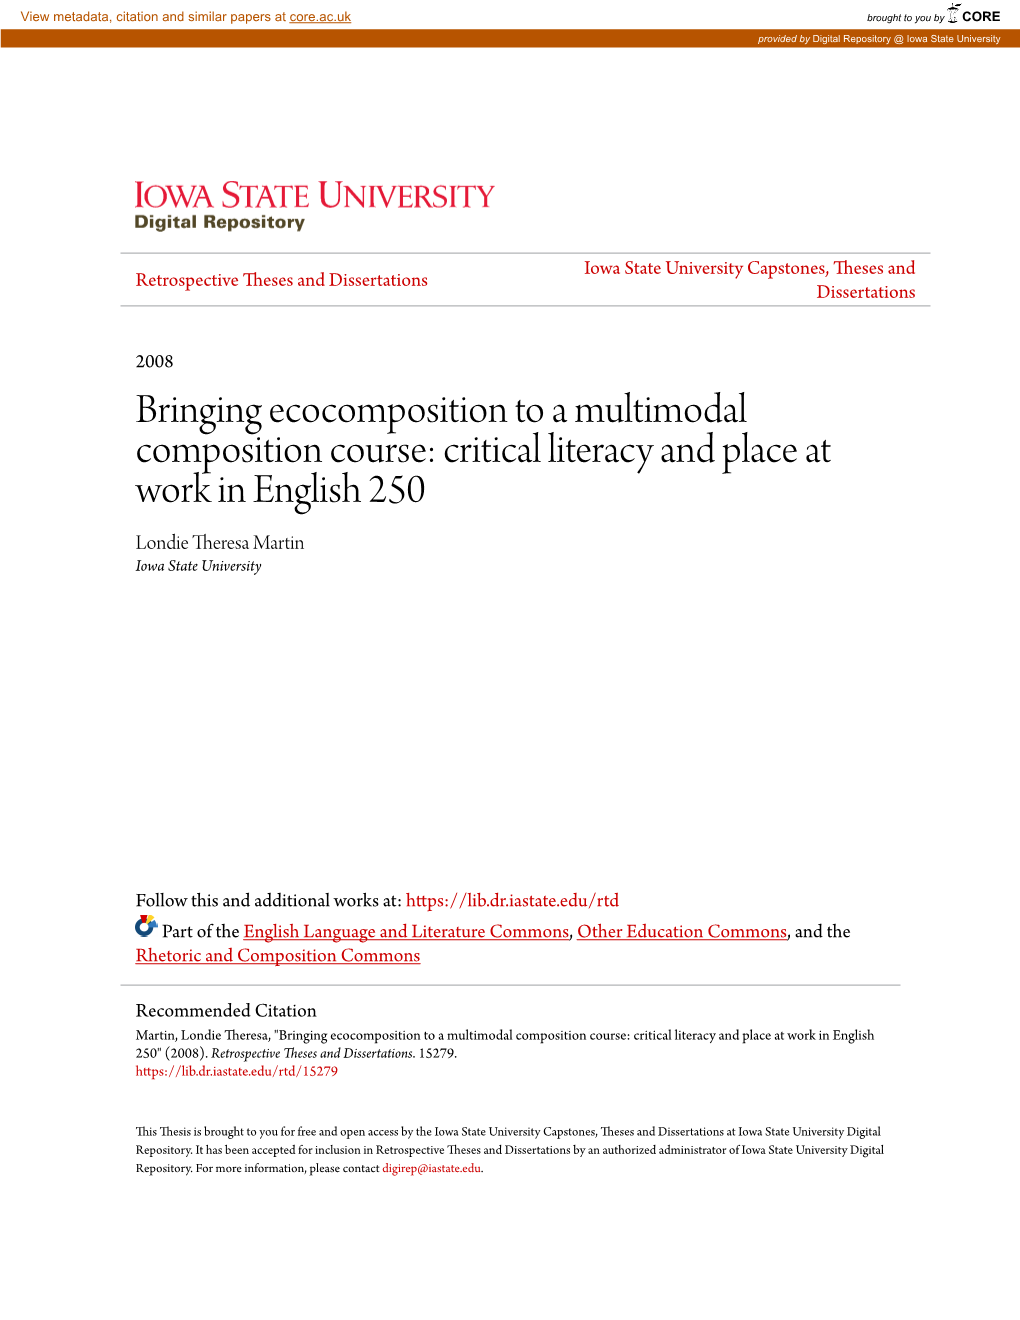 Bringing Ecocomposition to a Multimodal Composition Course: Critical Literacy and Place at Work in English 250 Londie Theresa Martin Iowa State University